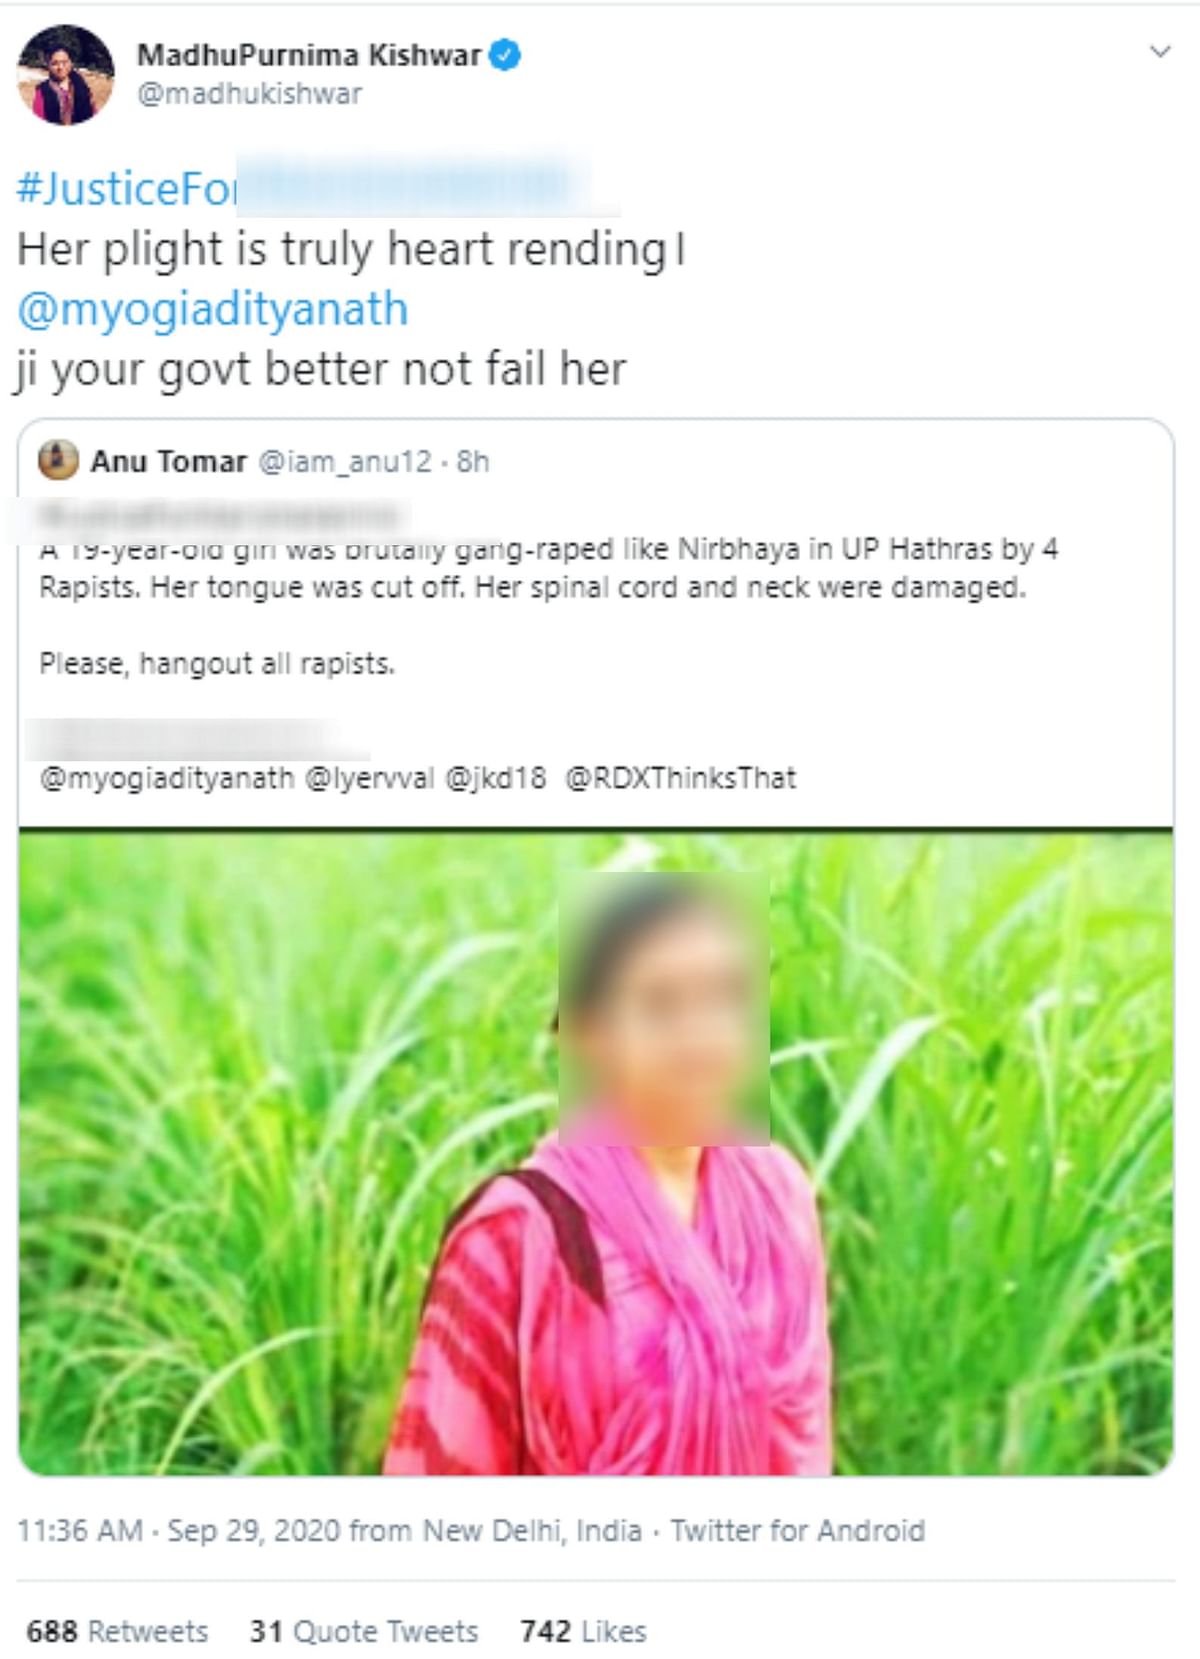 The brother of victim confirmed with The Quint that they do not know the girl in the viral image.